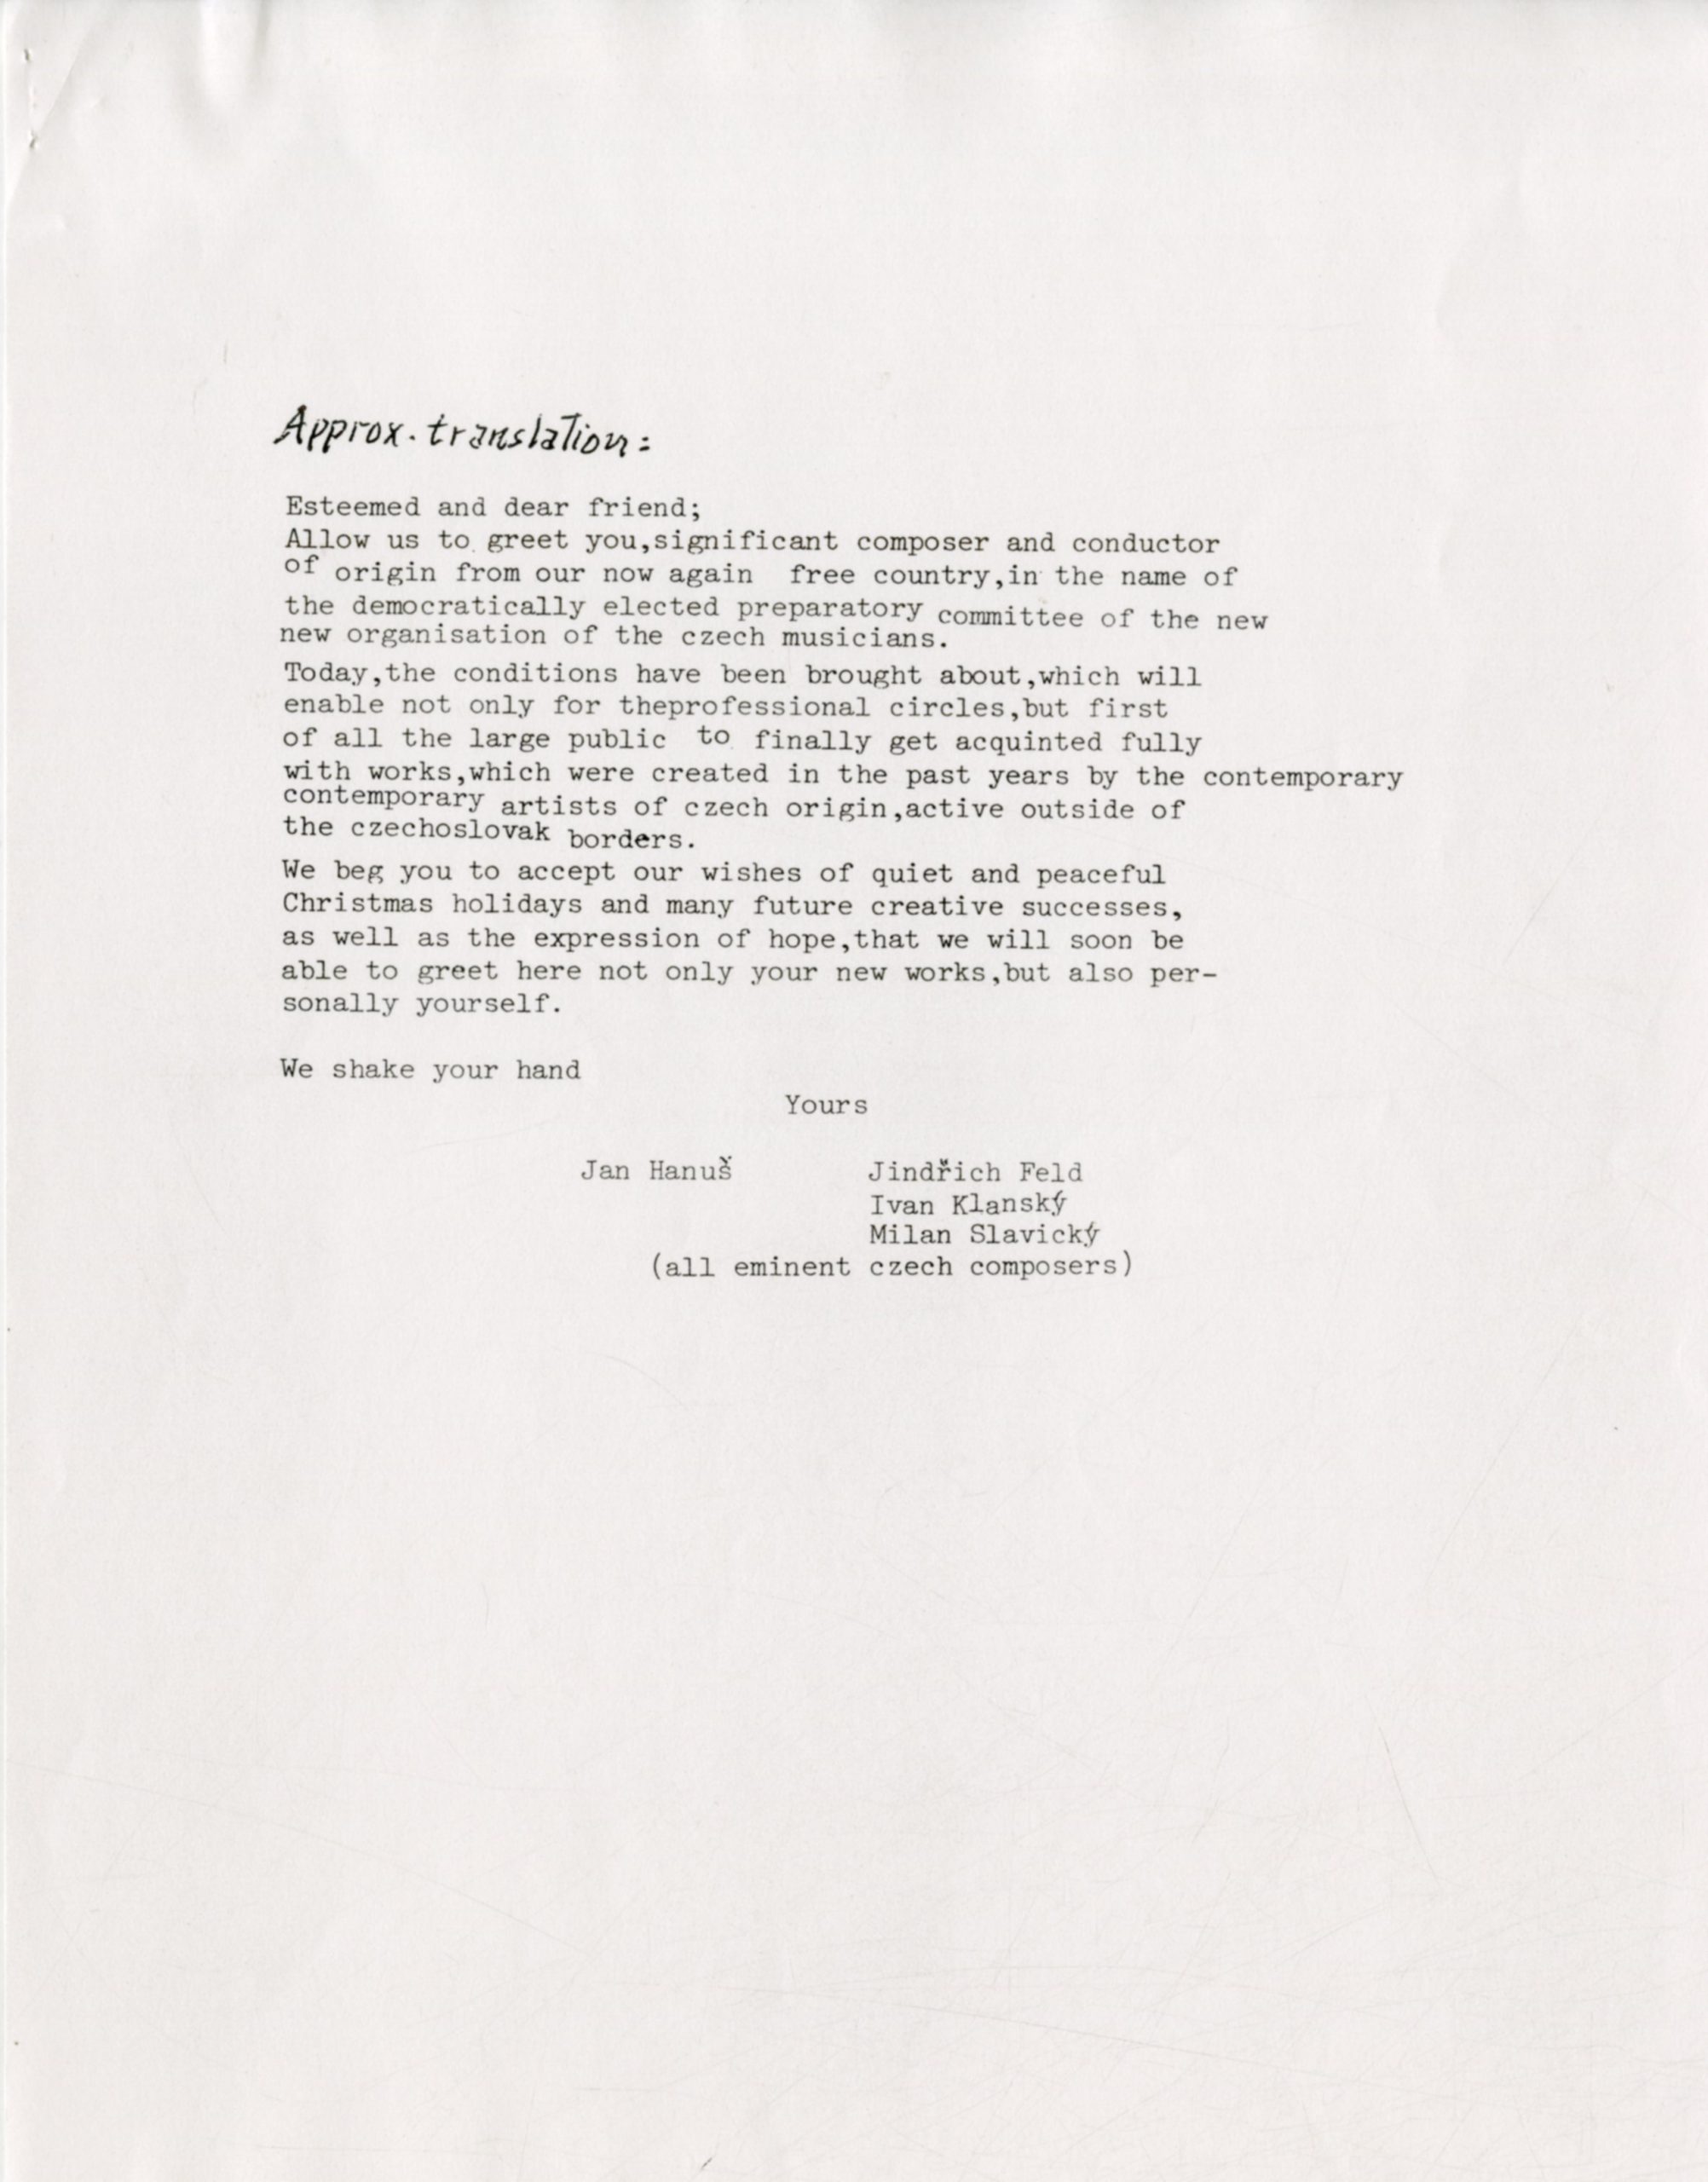 Translation of letter from Czech Composer’s Union.